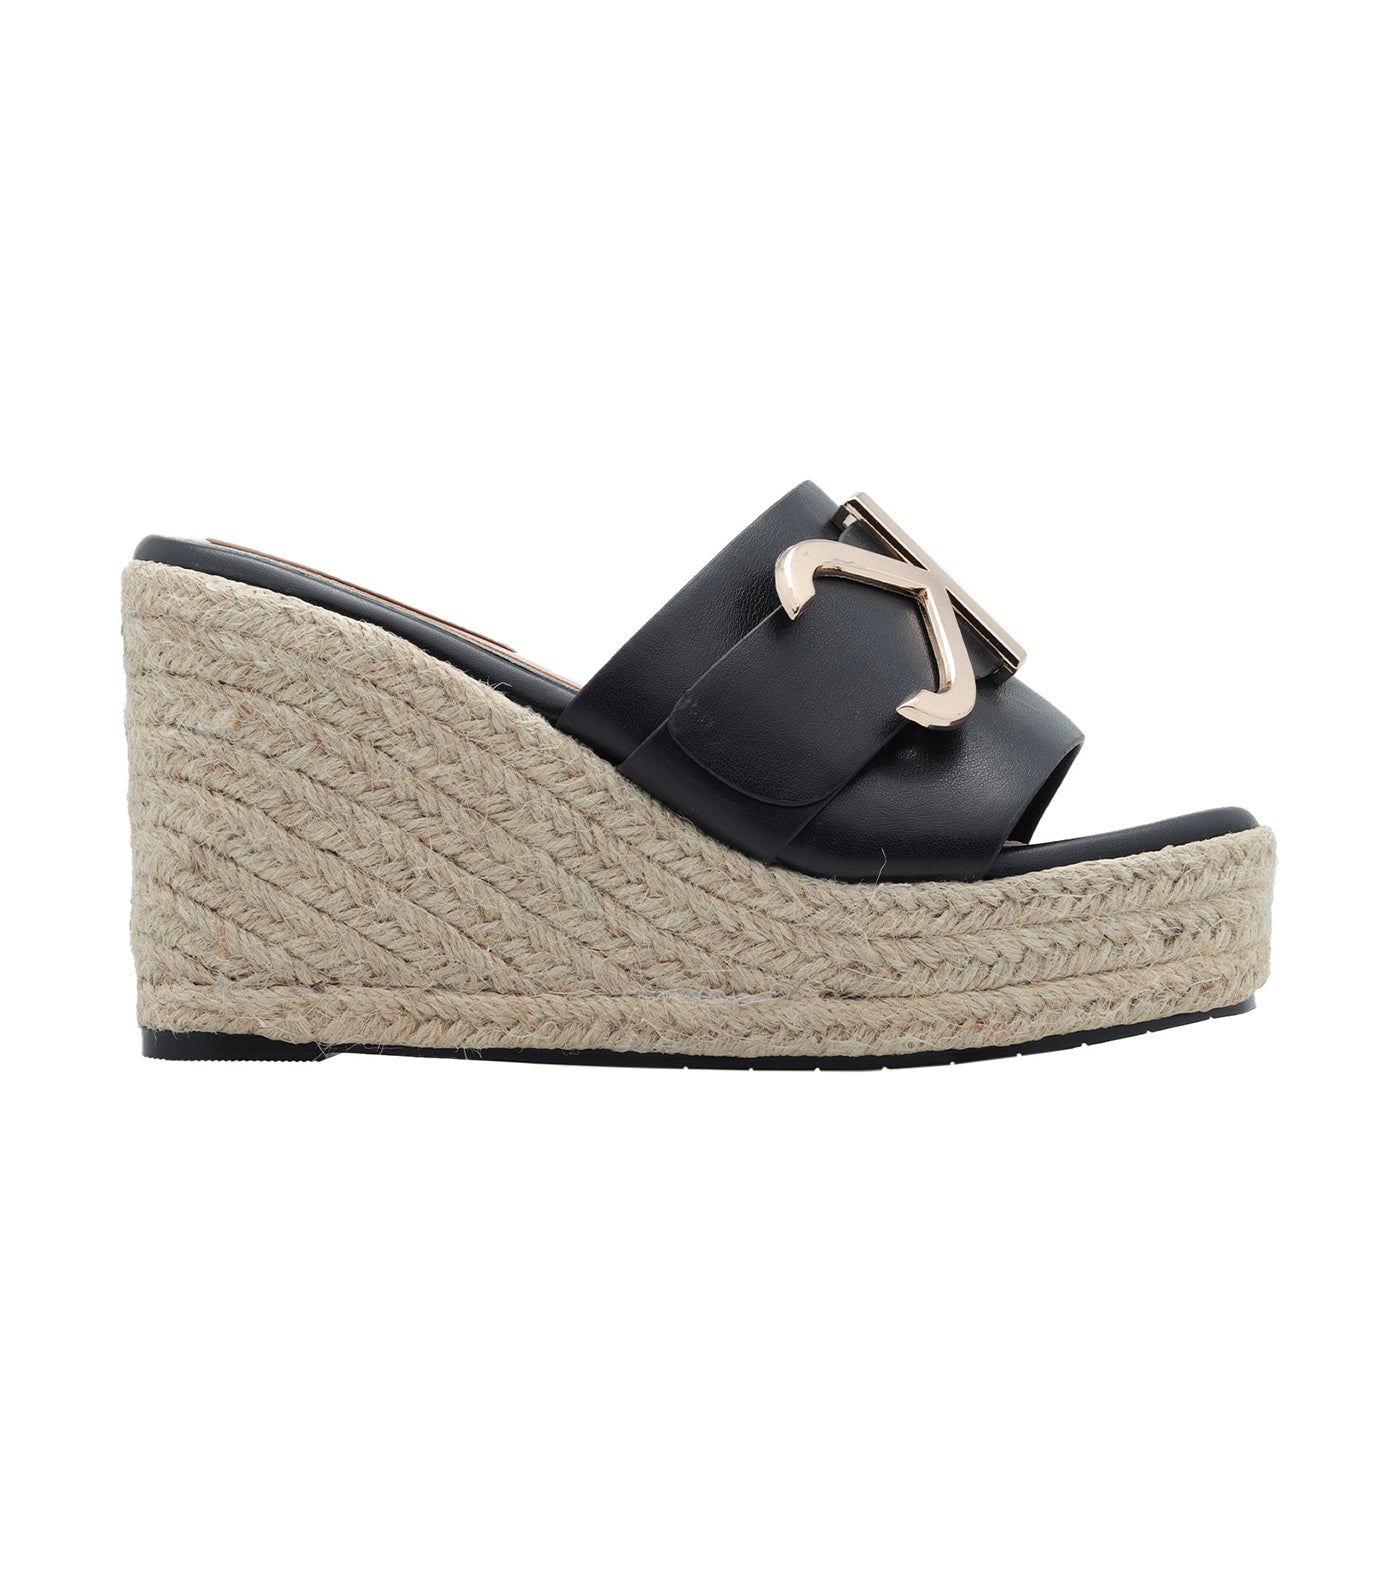 The KC Wedge Black